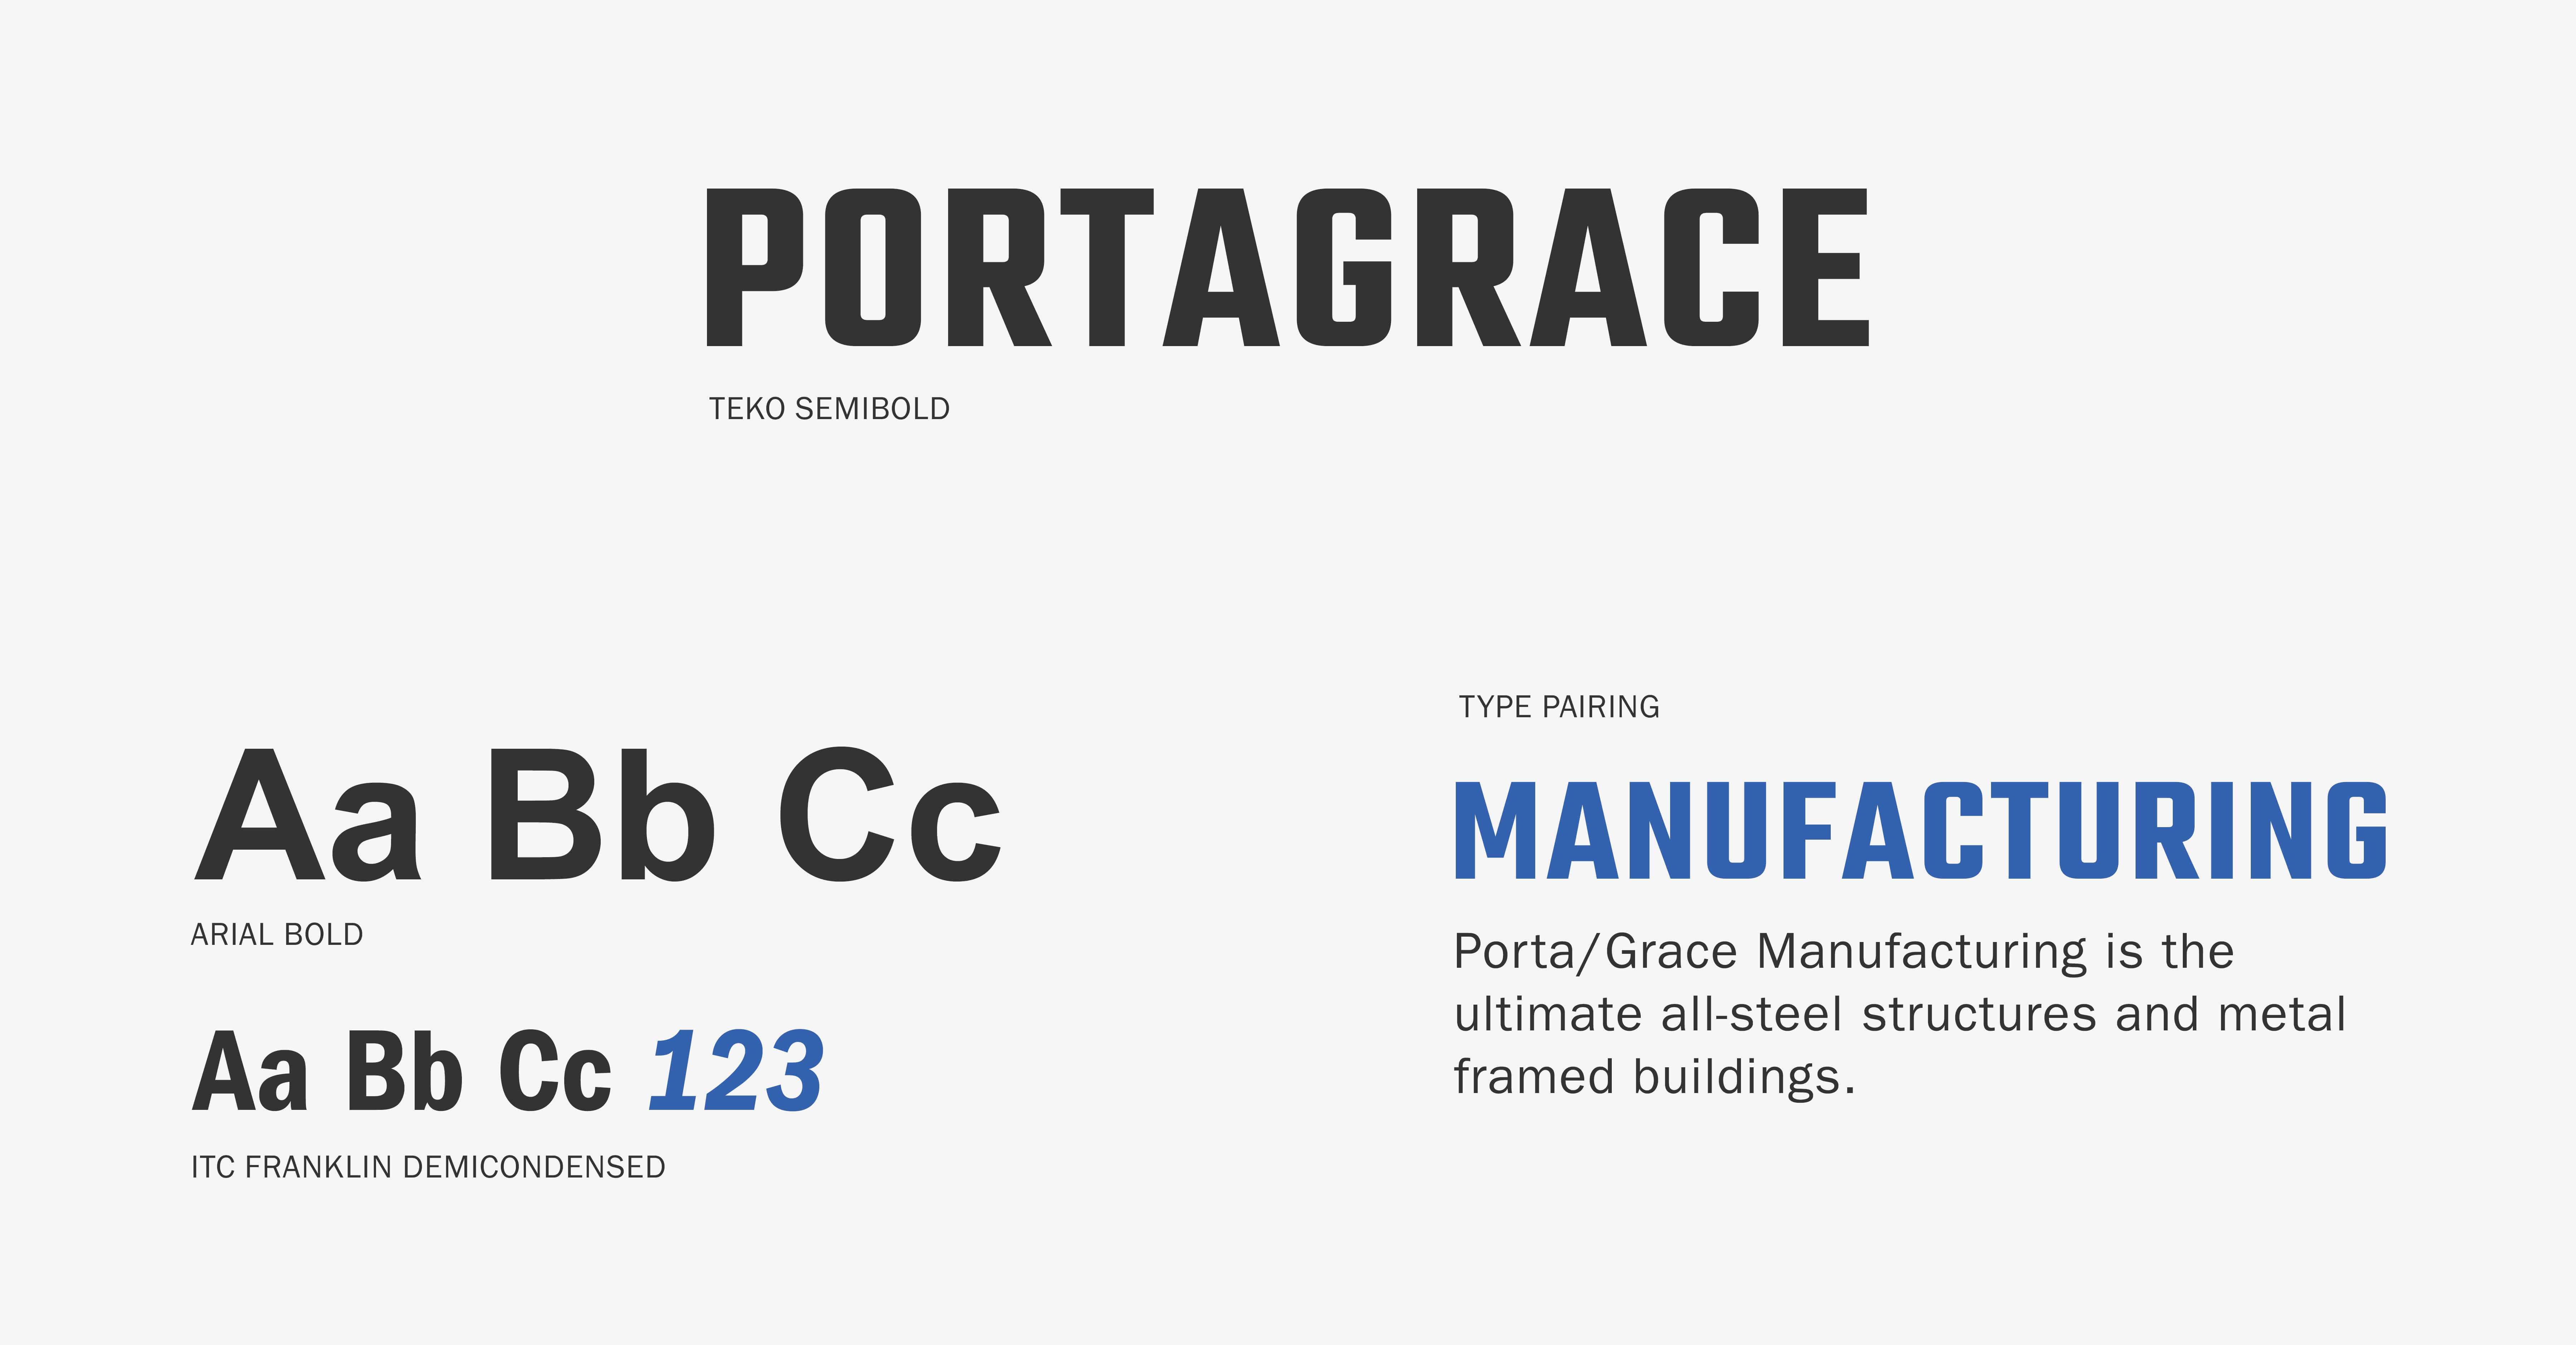 Type usage for PortaGrace Manufacturing